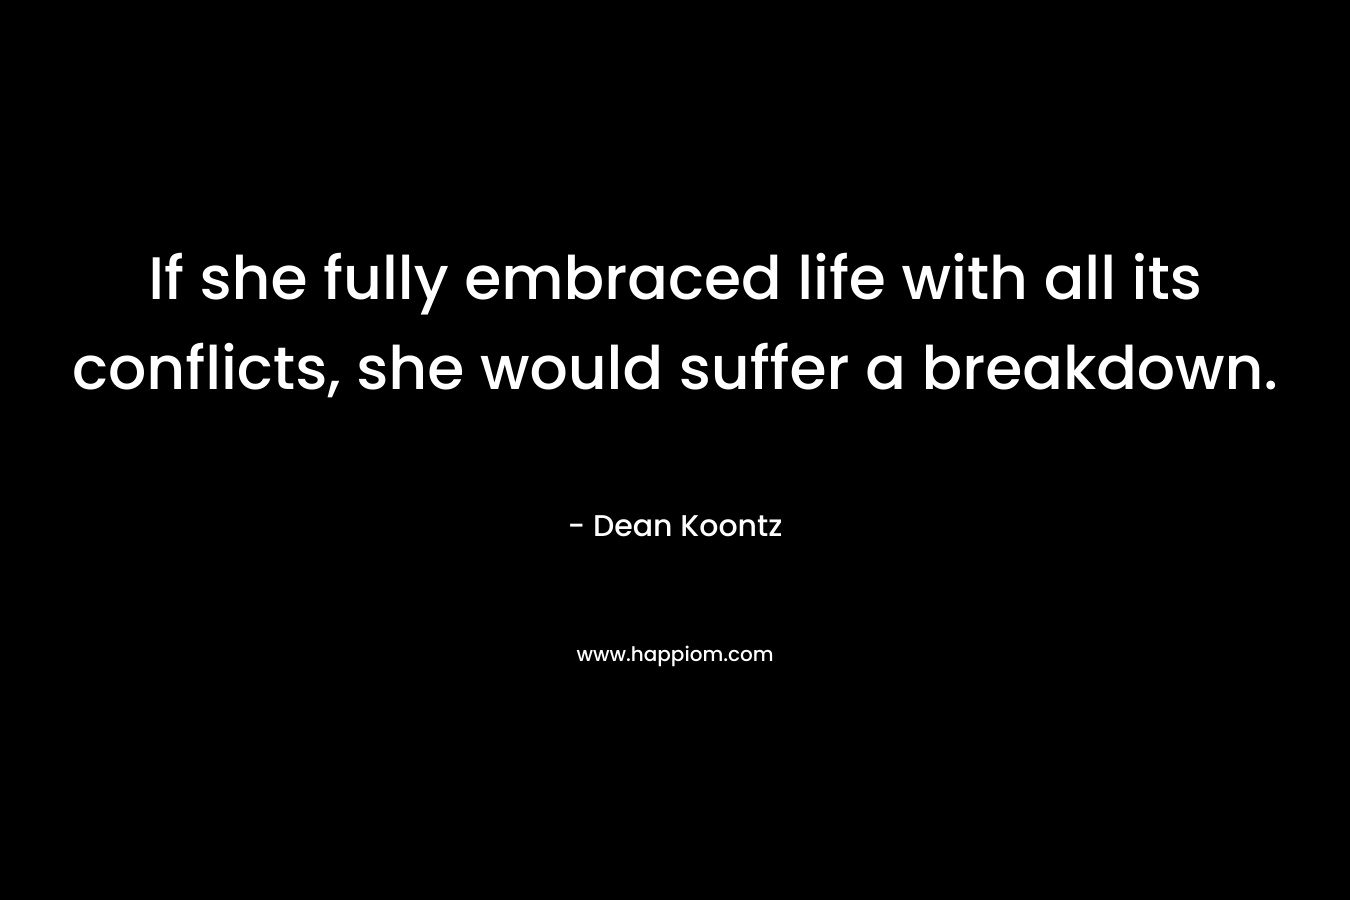 If she fully embraced life with all its conflicts, she would suffer a breakdown. – Dean Koontz